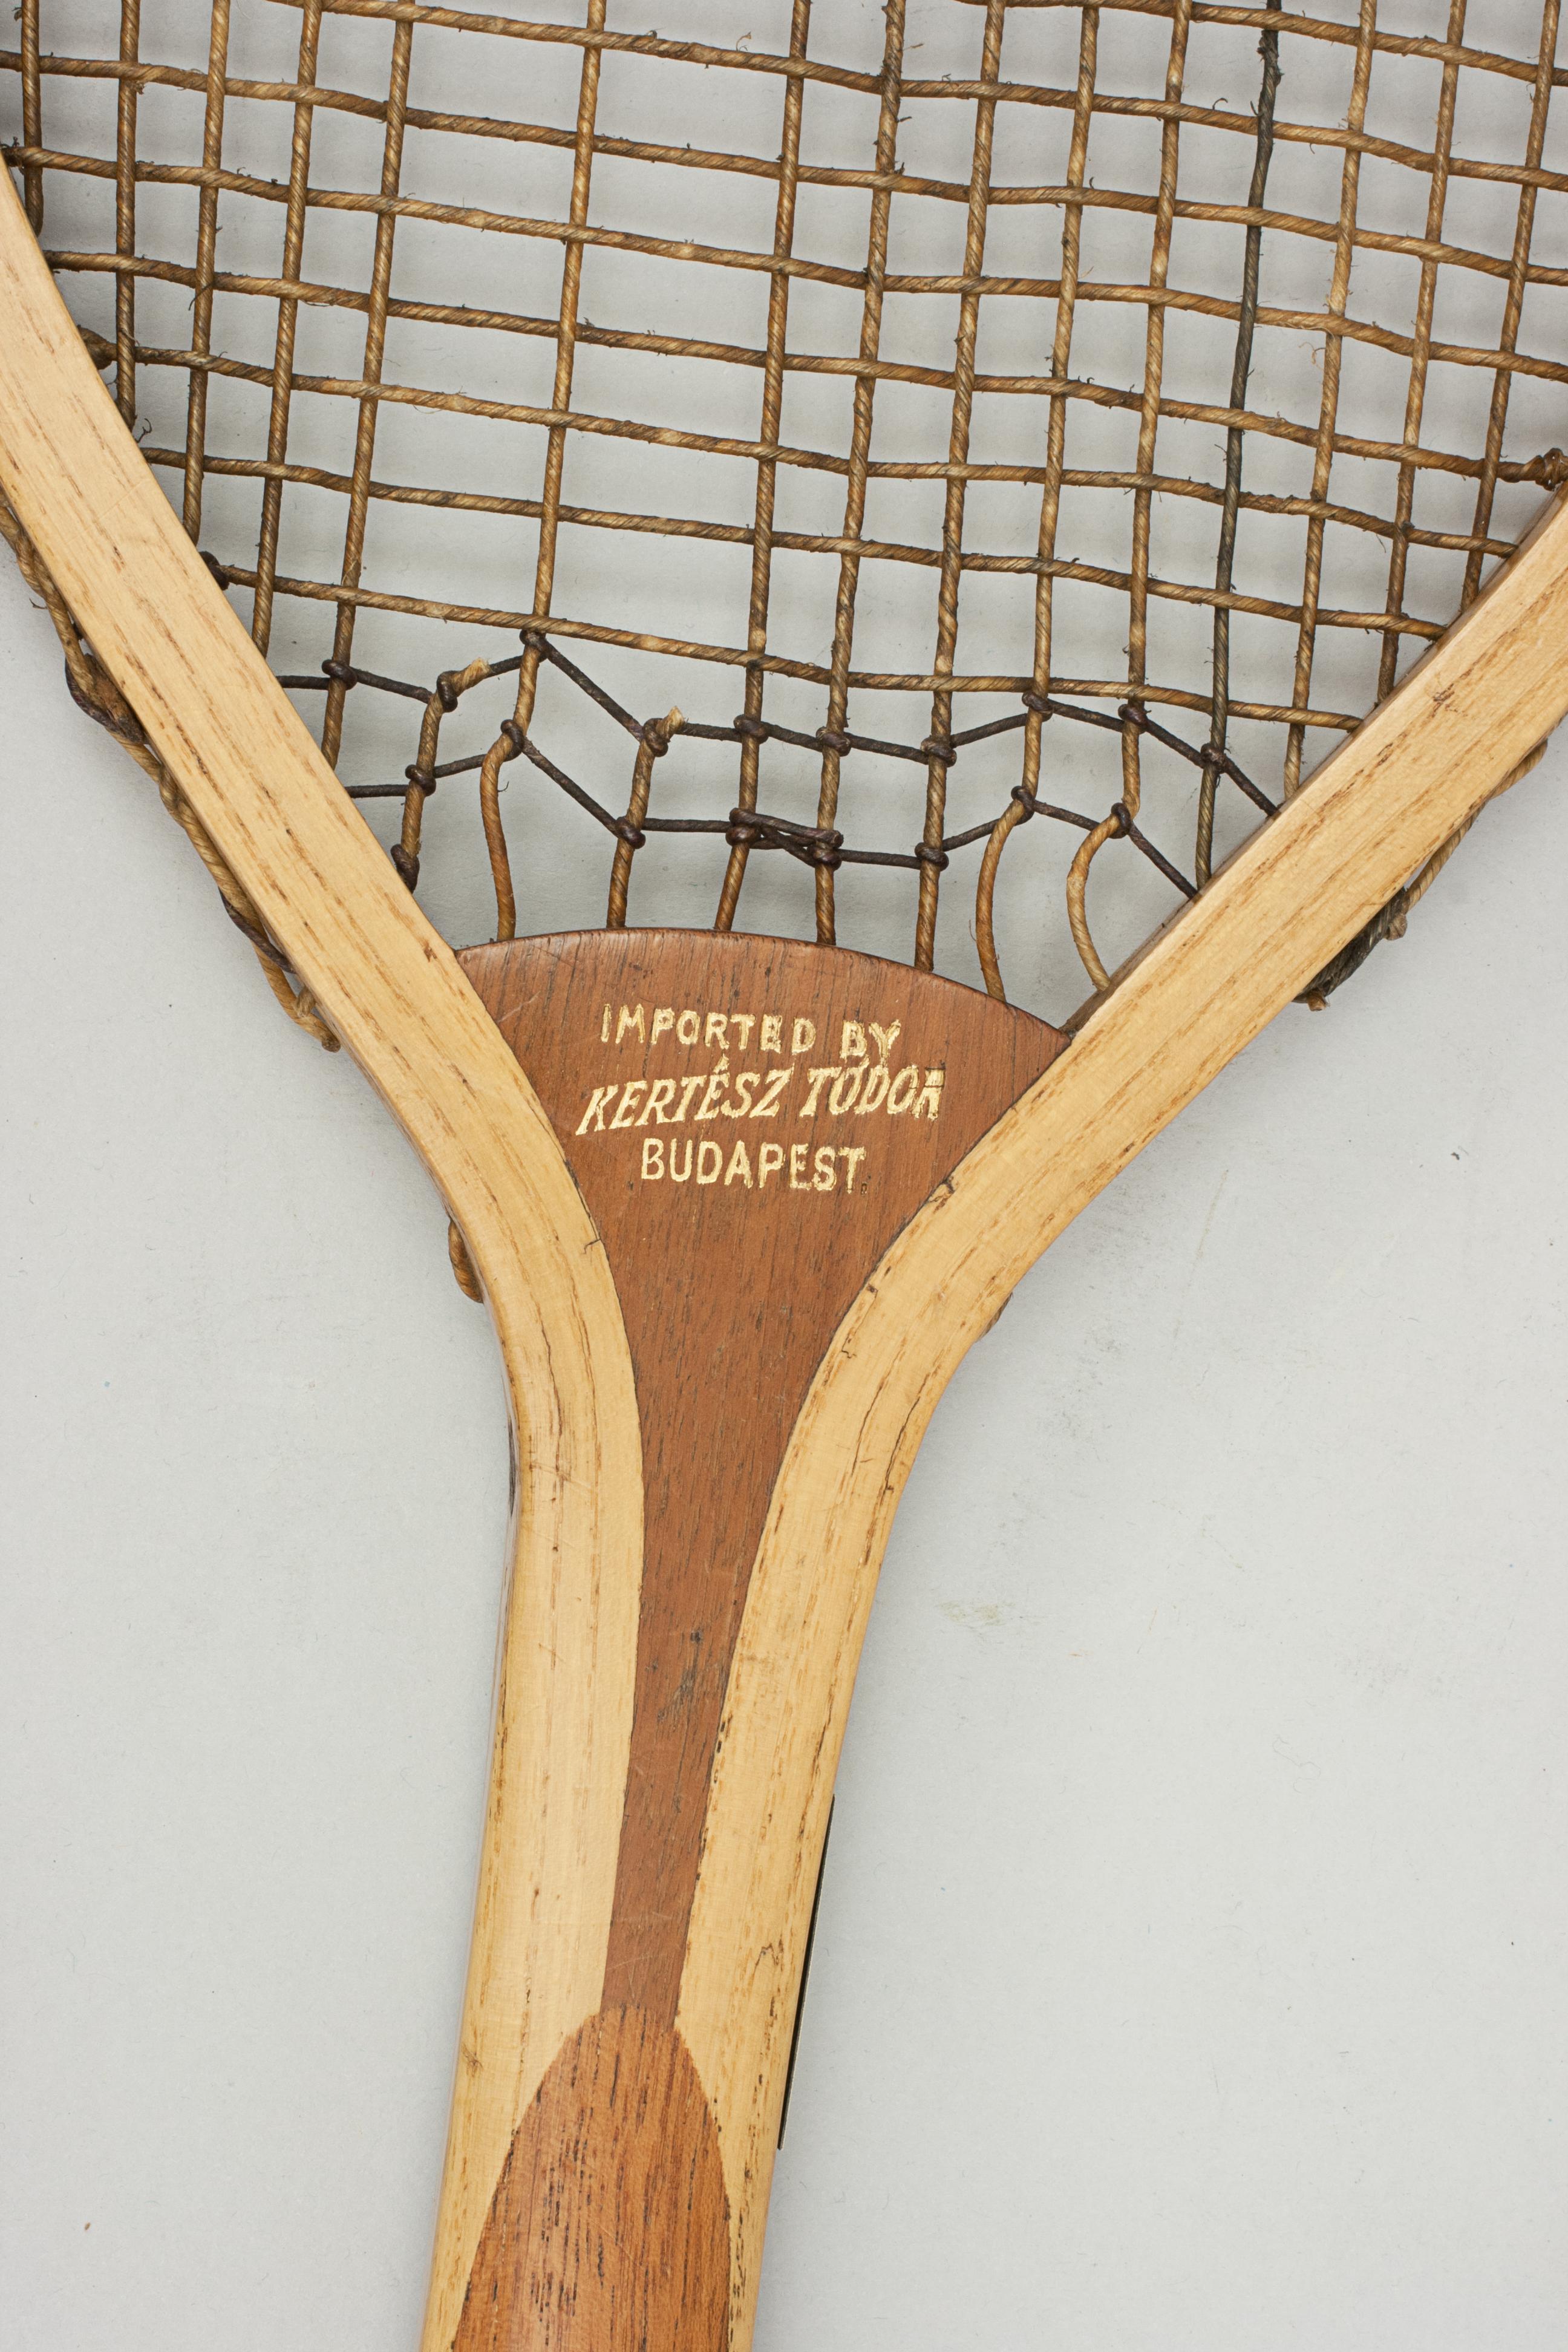 Lawn Tennis Racket, the Premier, Kertesz Todor, Budapest In Good Condition For Sale In Oxfordshire, GB